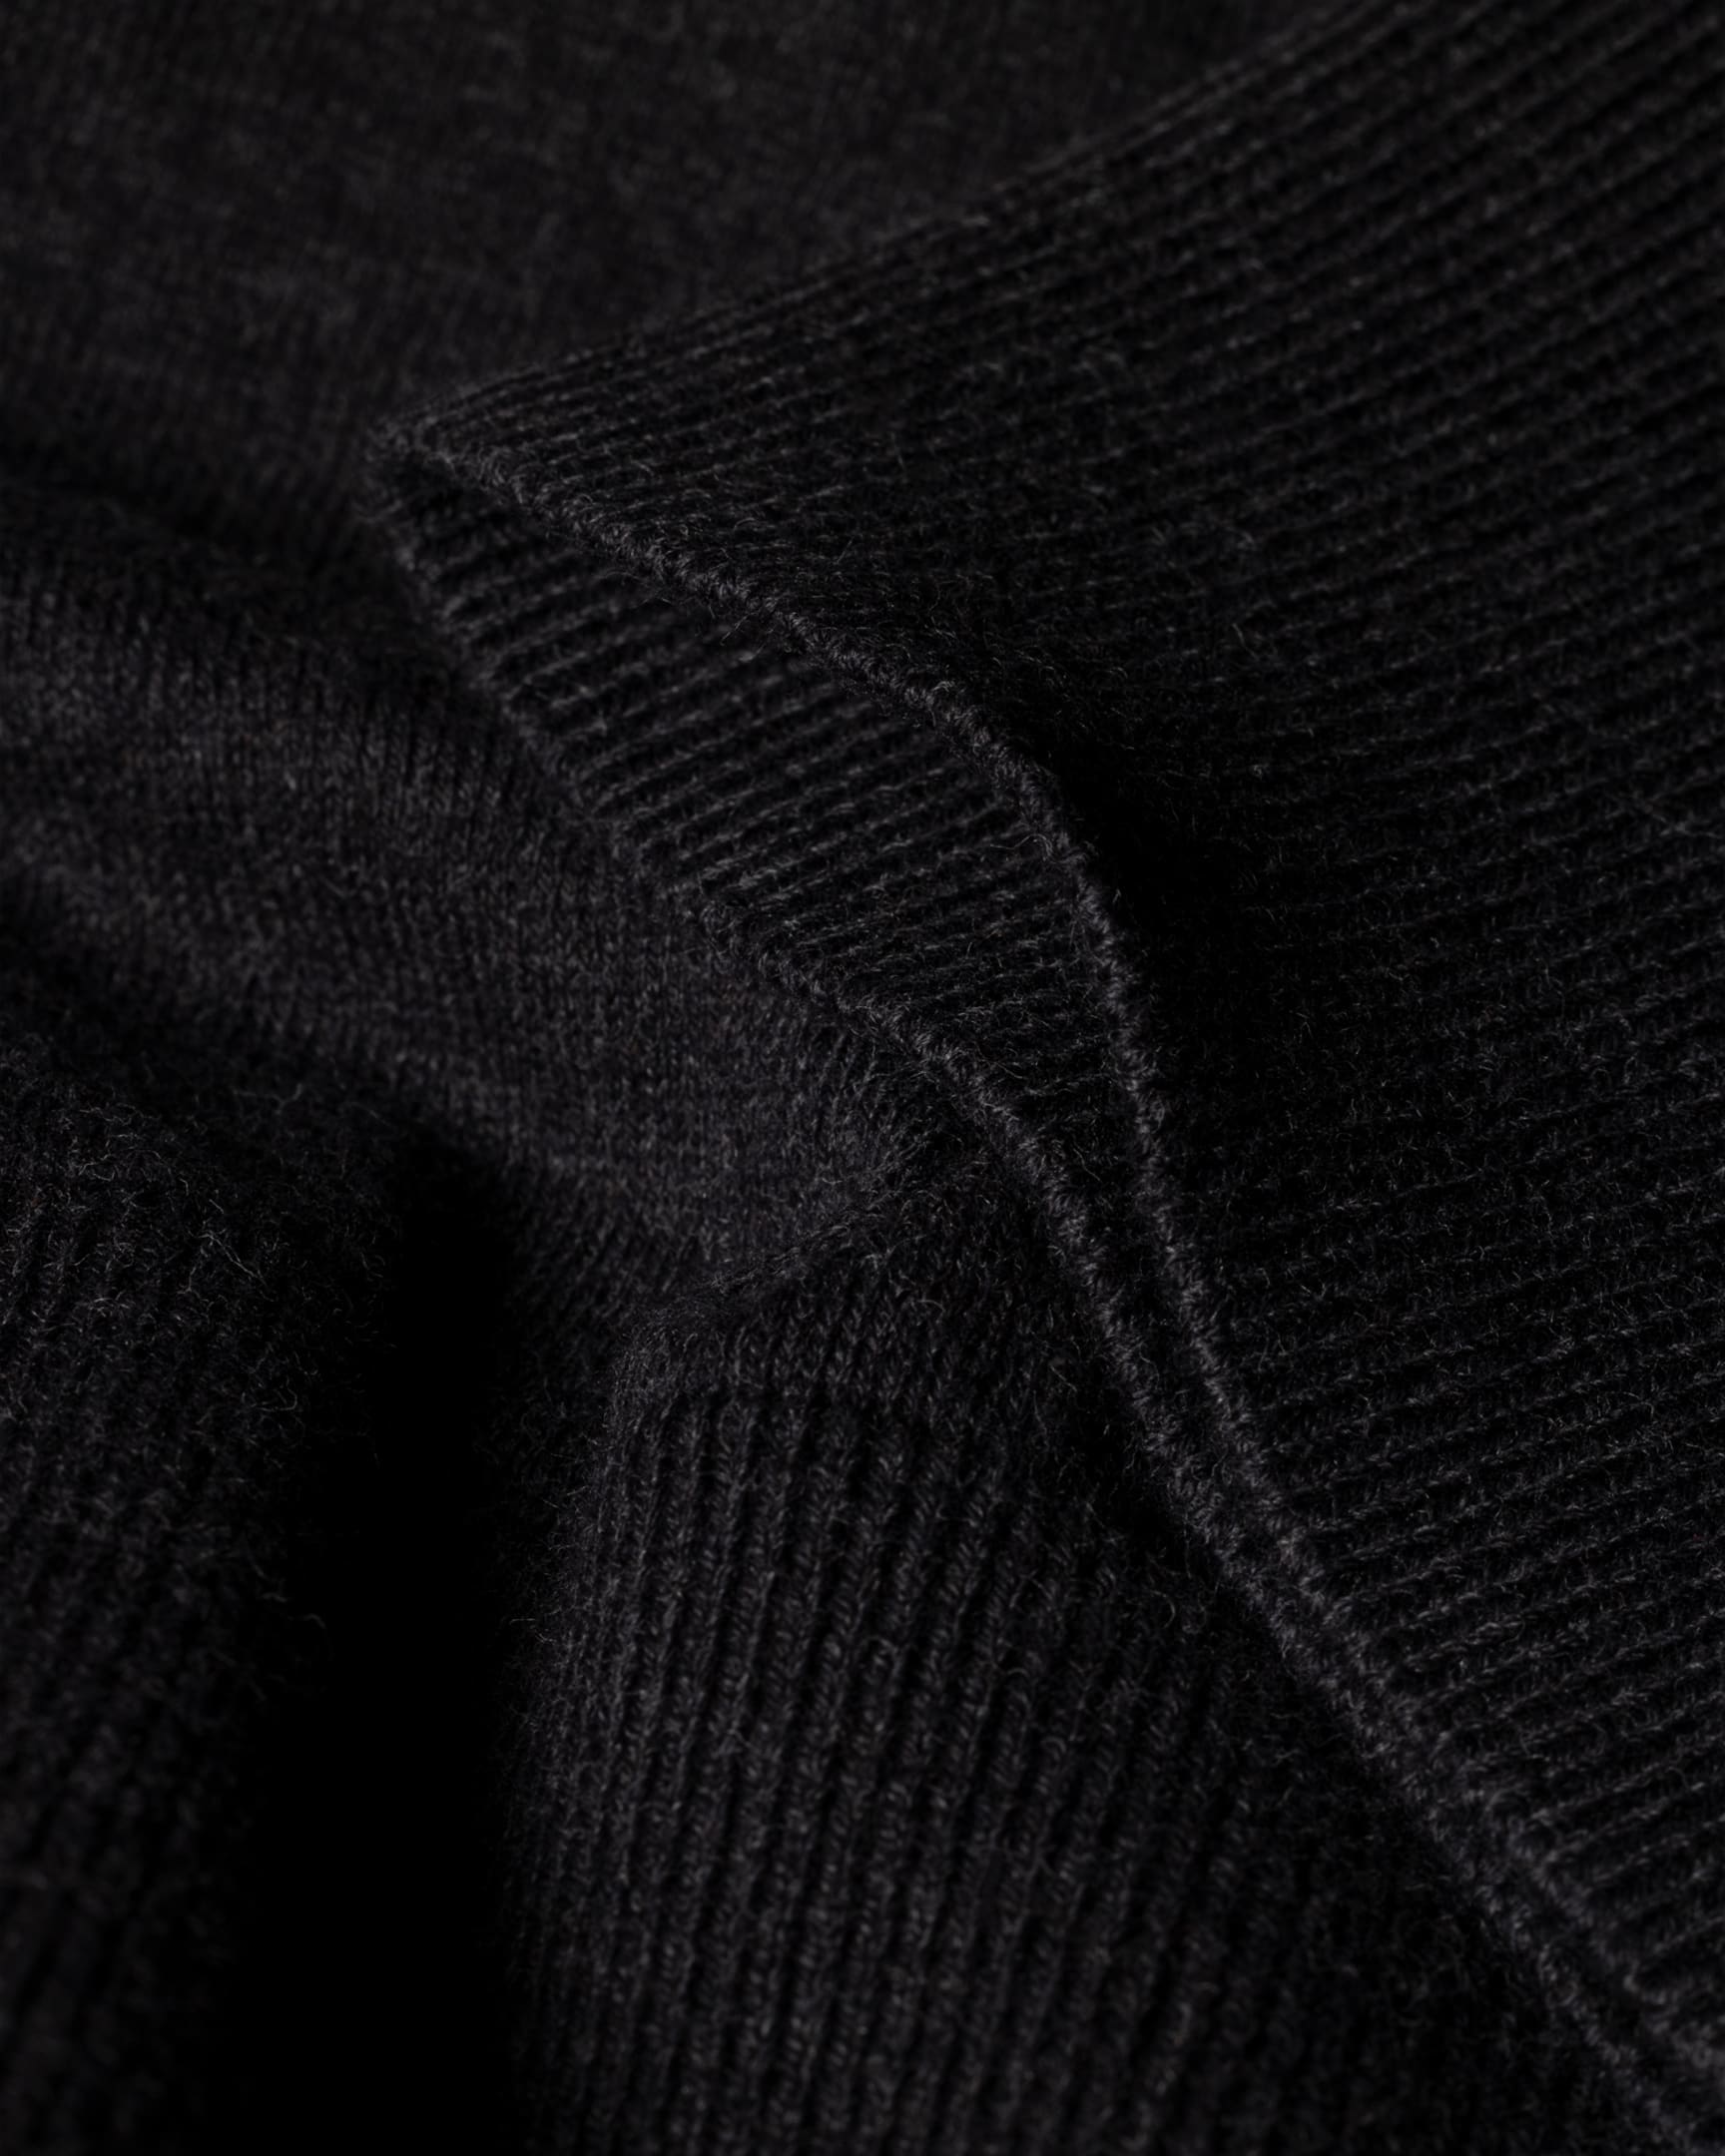 Detail View - Charcoal Cotton-Blend 'Signature Stripe' Long-Sleeve Polo Shirt Paul Smith